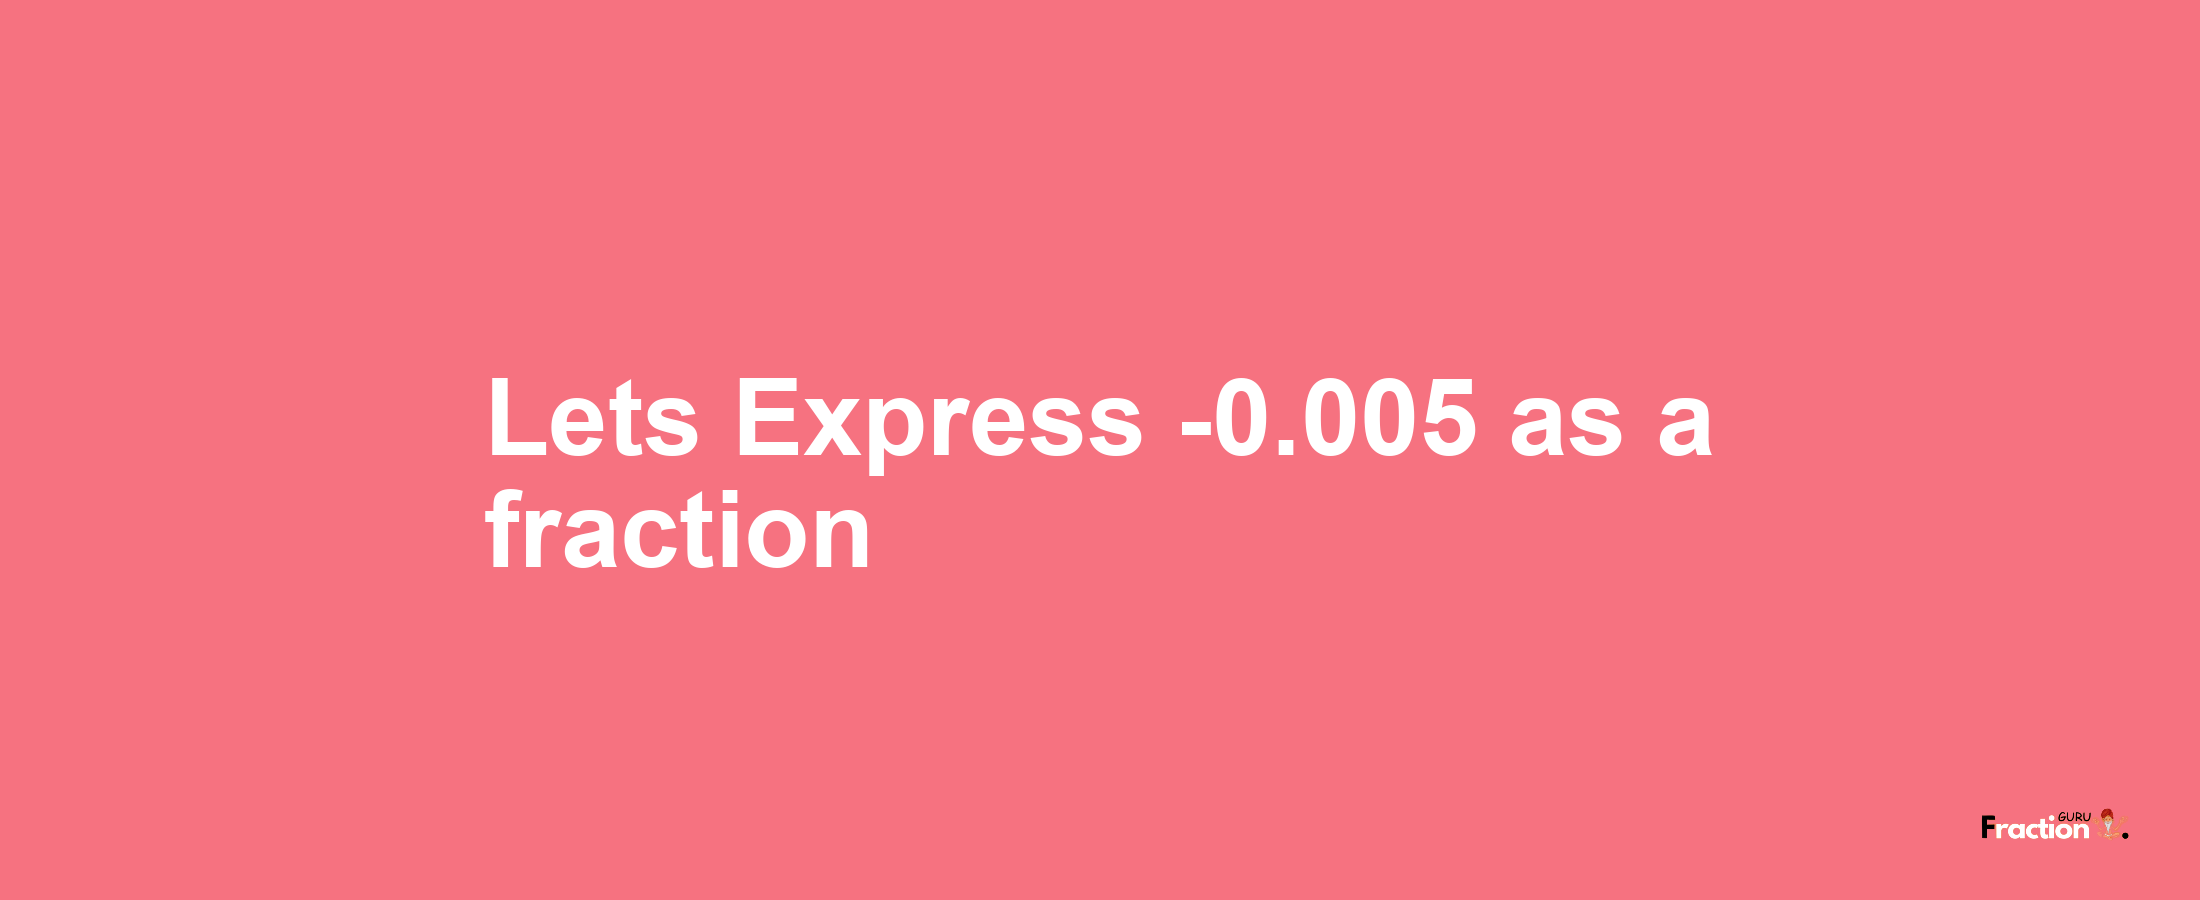 Lets Express -0.005 as afraction